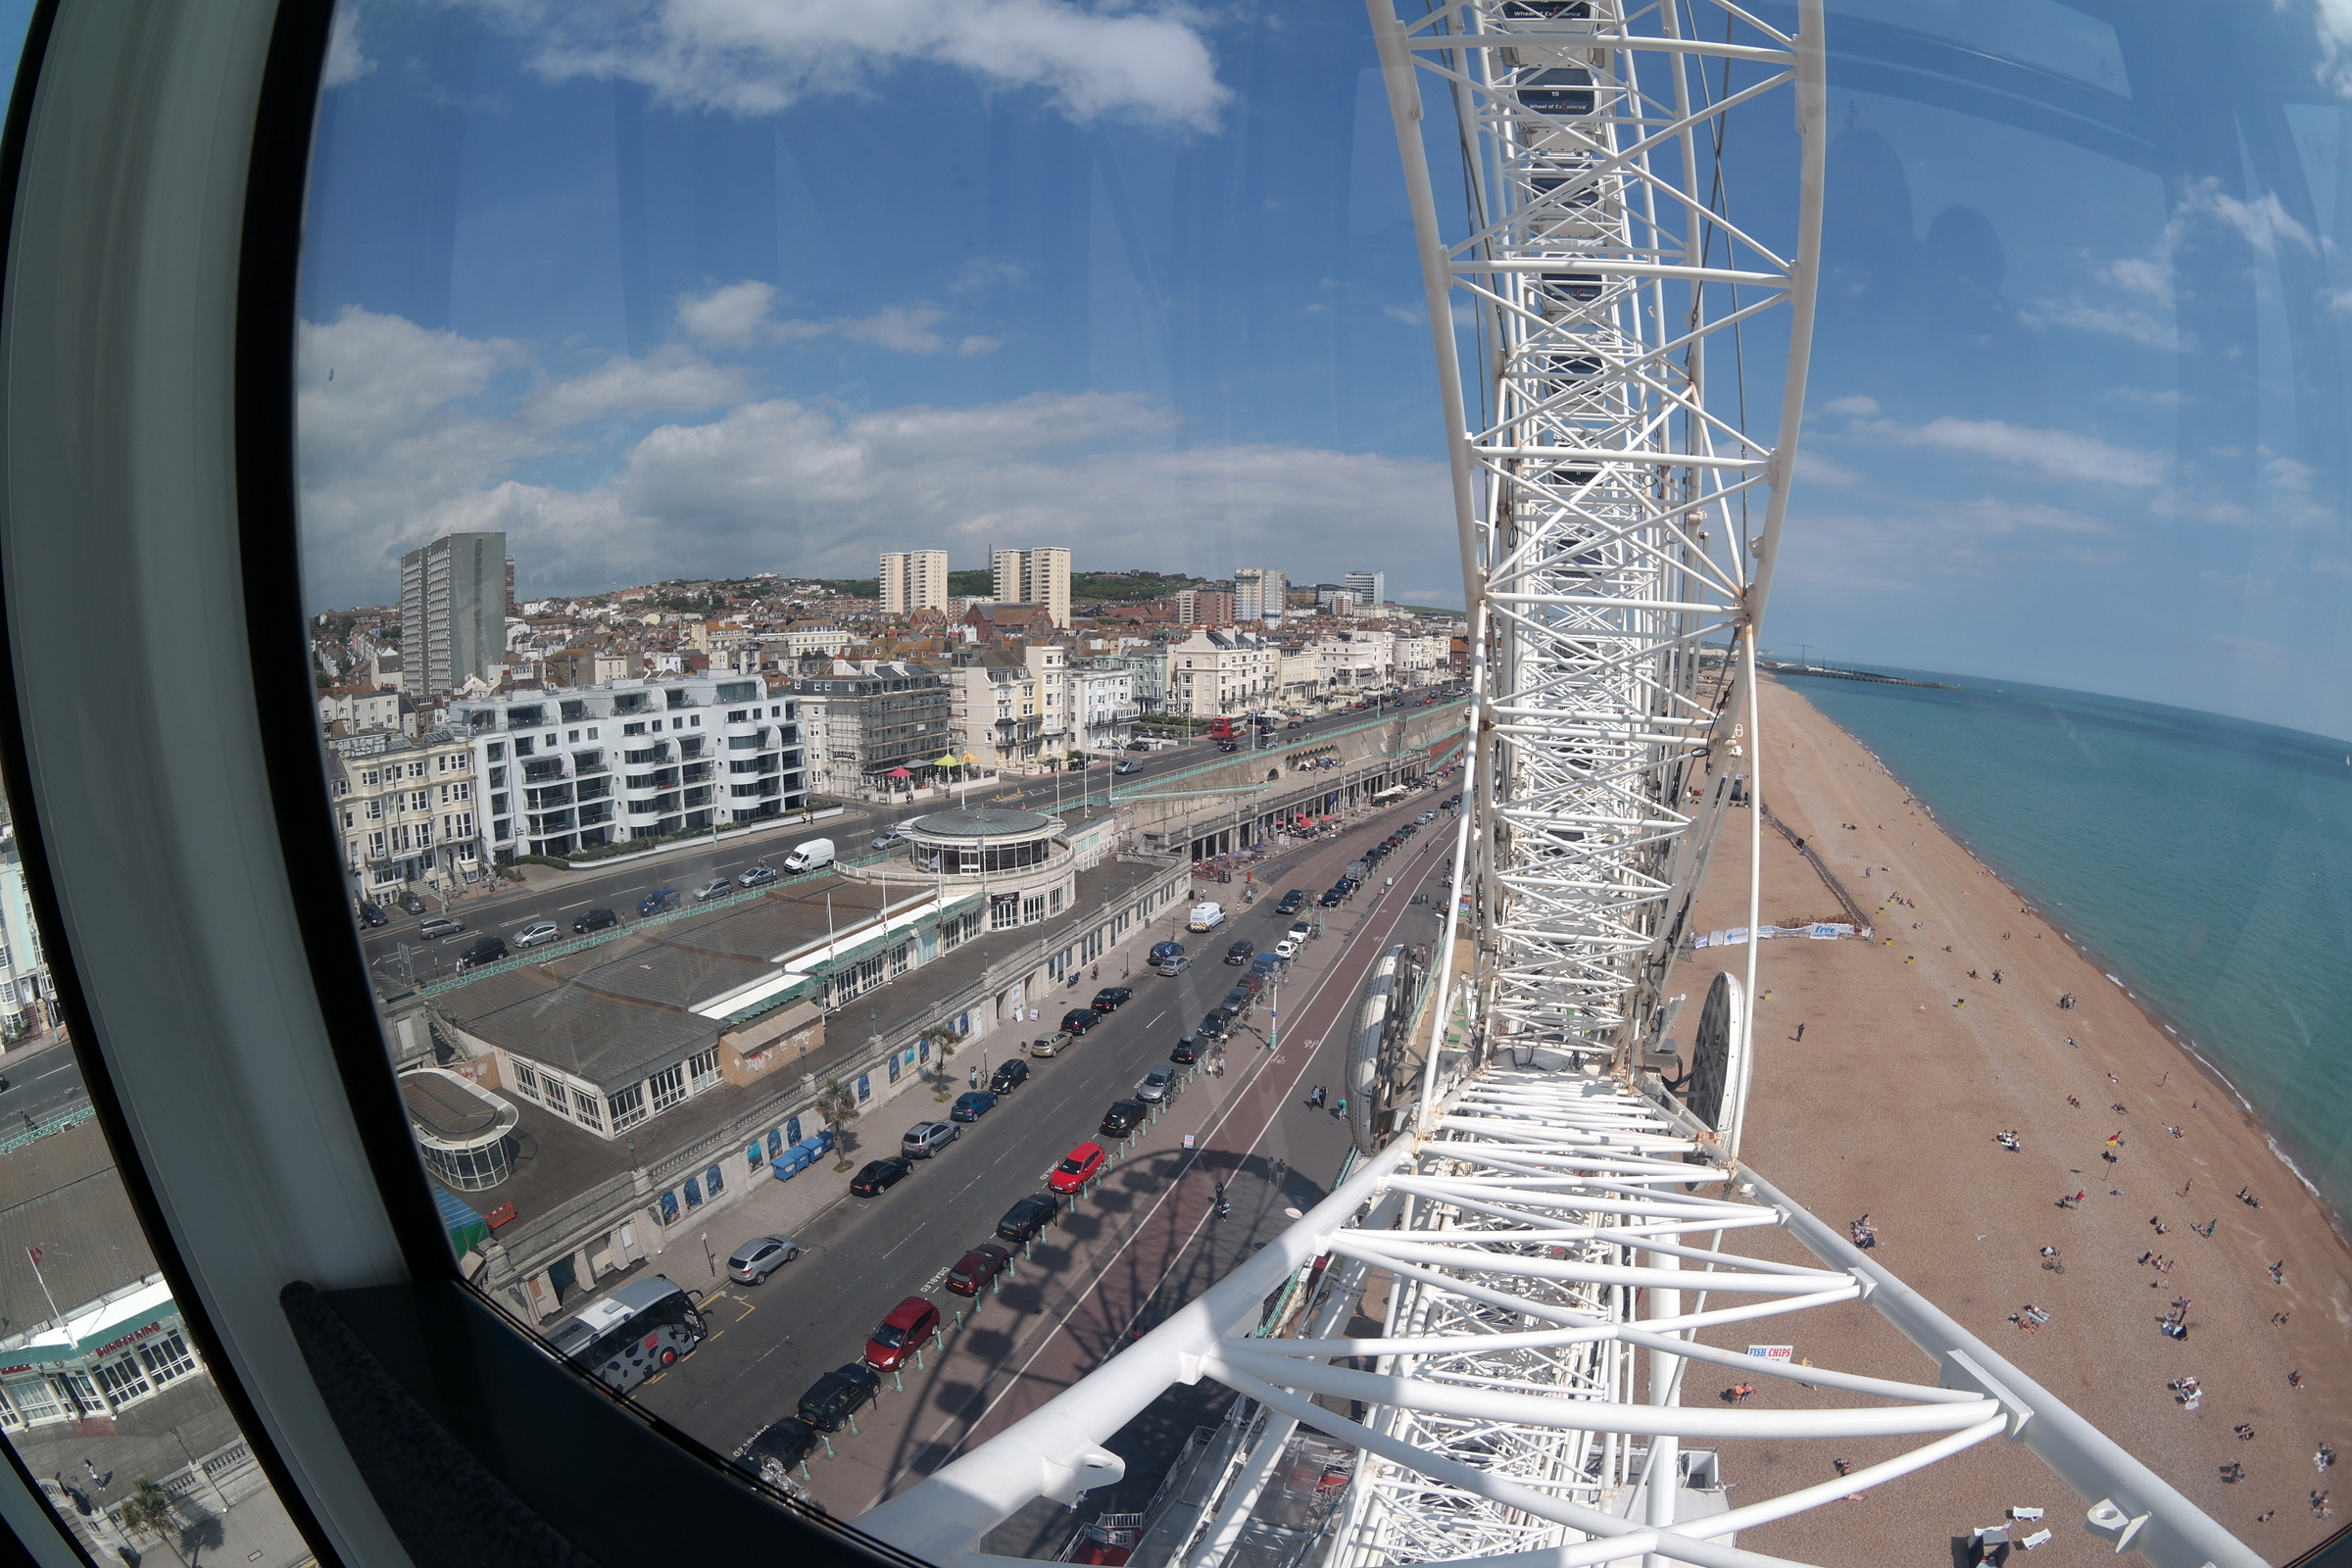 Category:Brighton Wheel - The Brighton Toy and Model Index